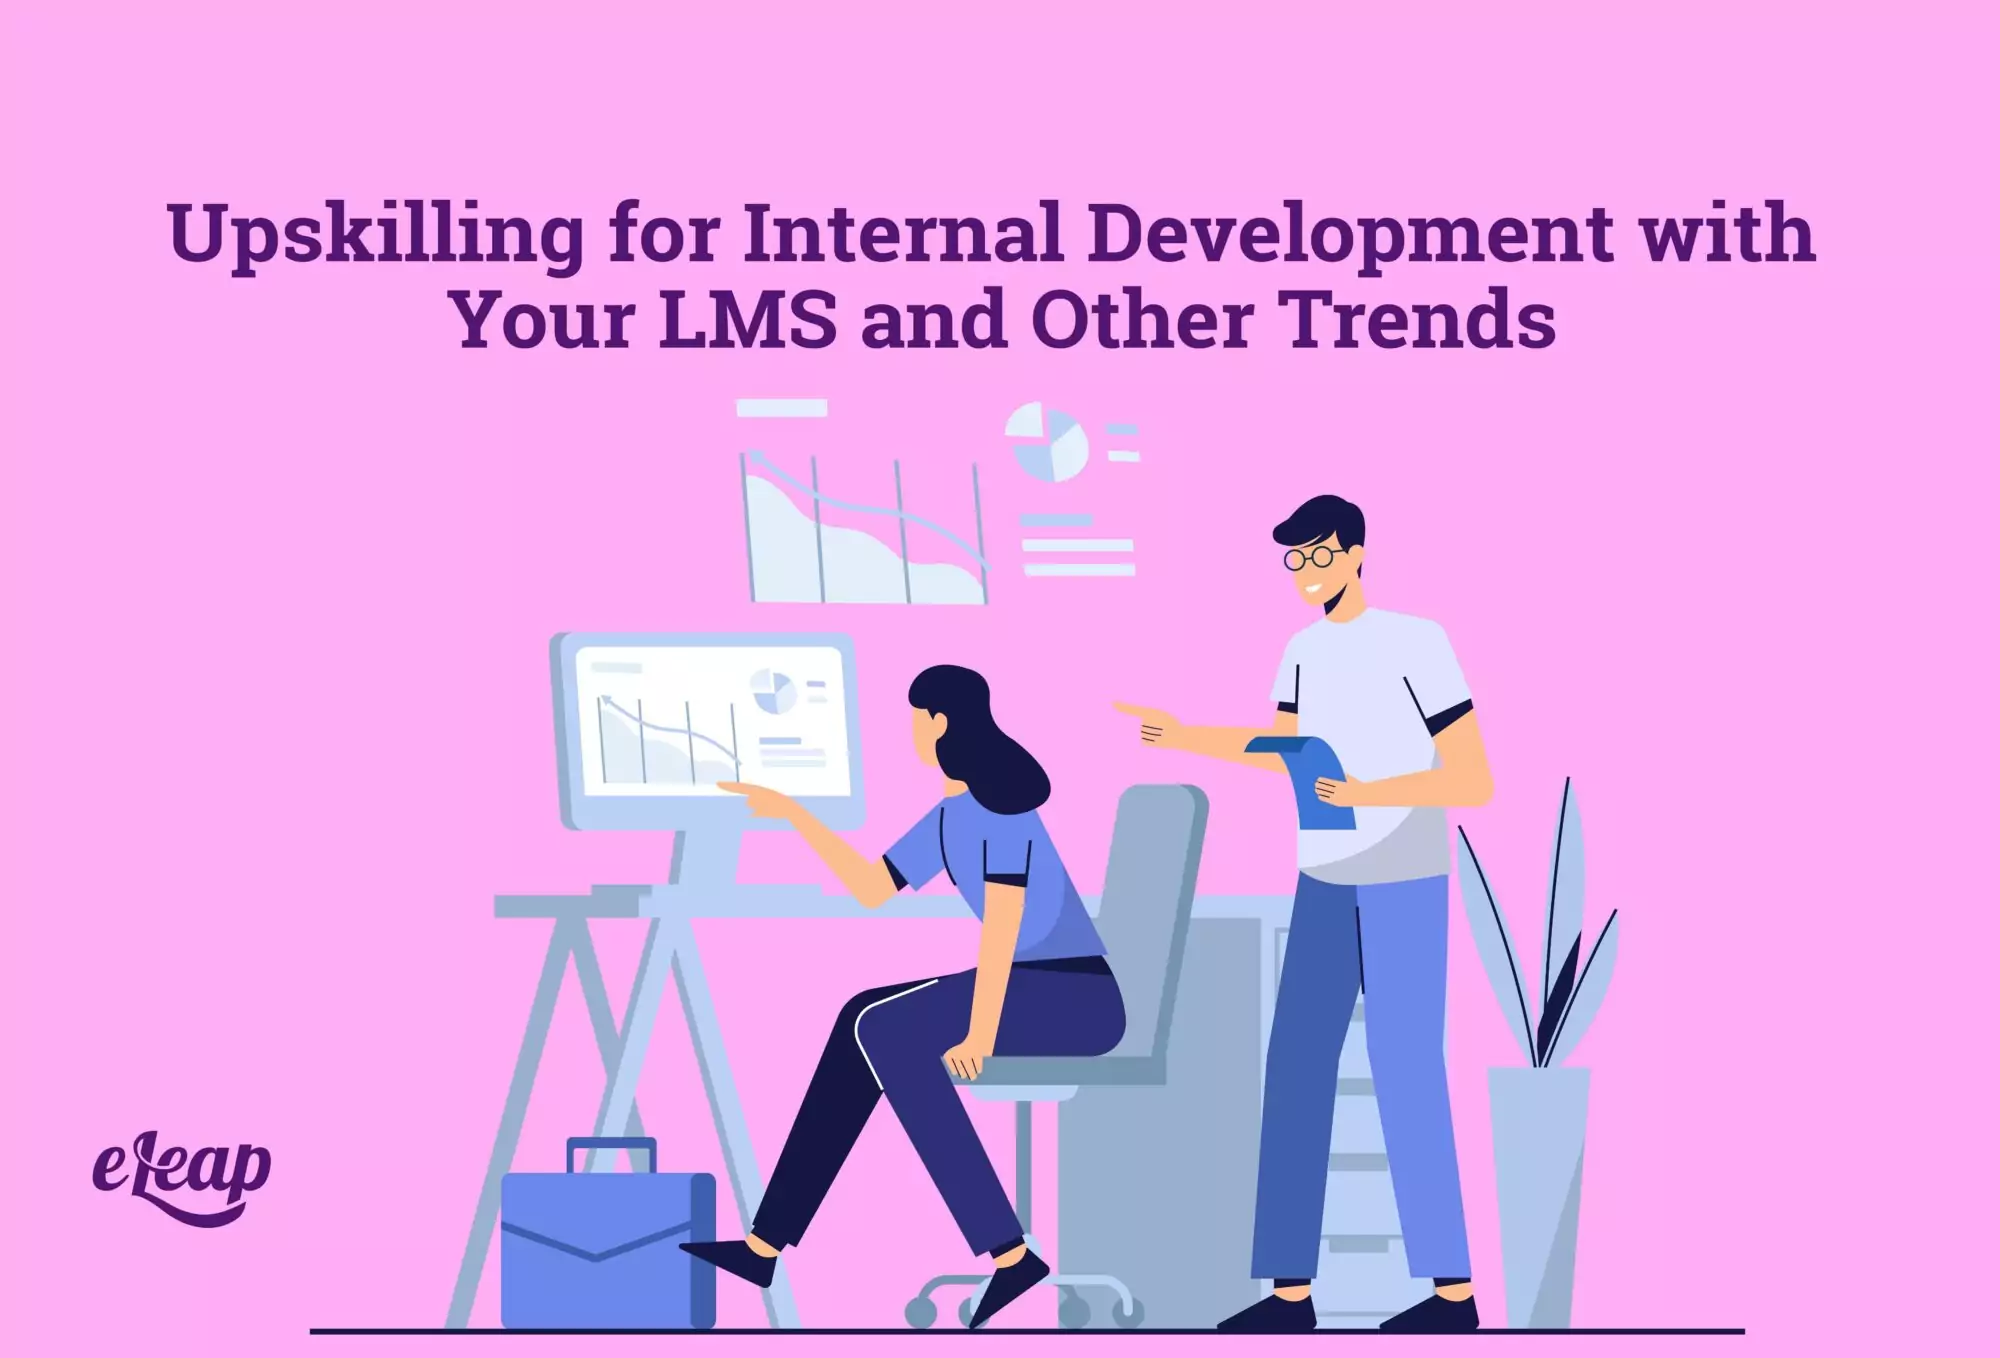 Upskilling for Internal Development with Your LMS and Other Trends